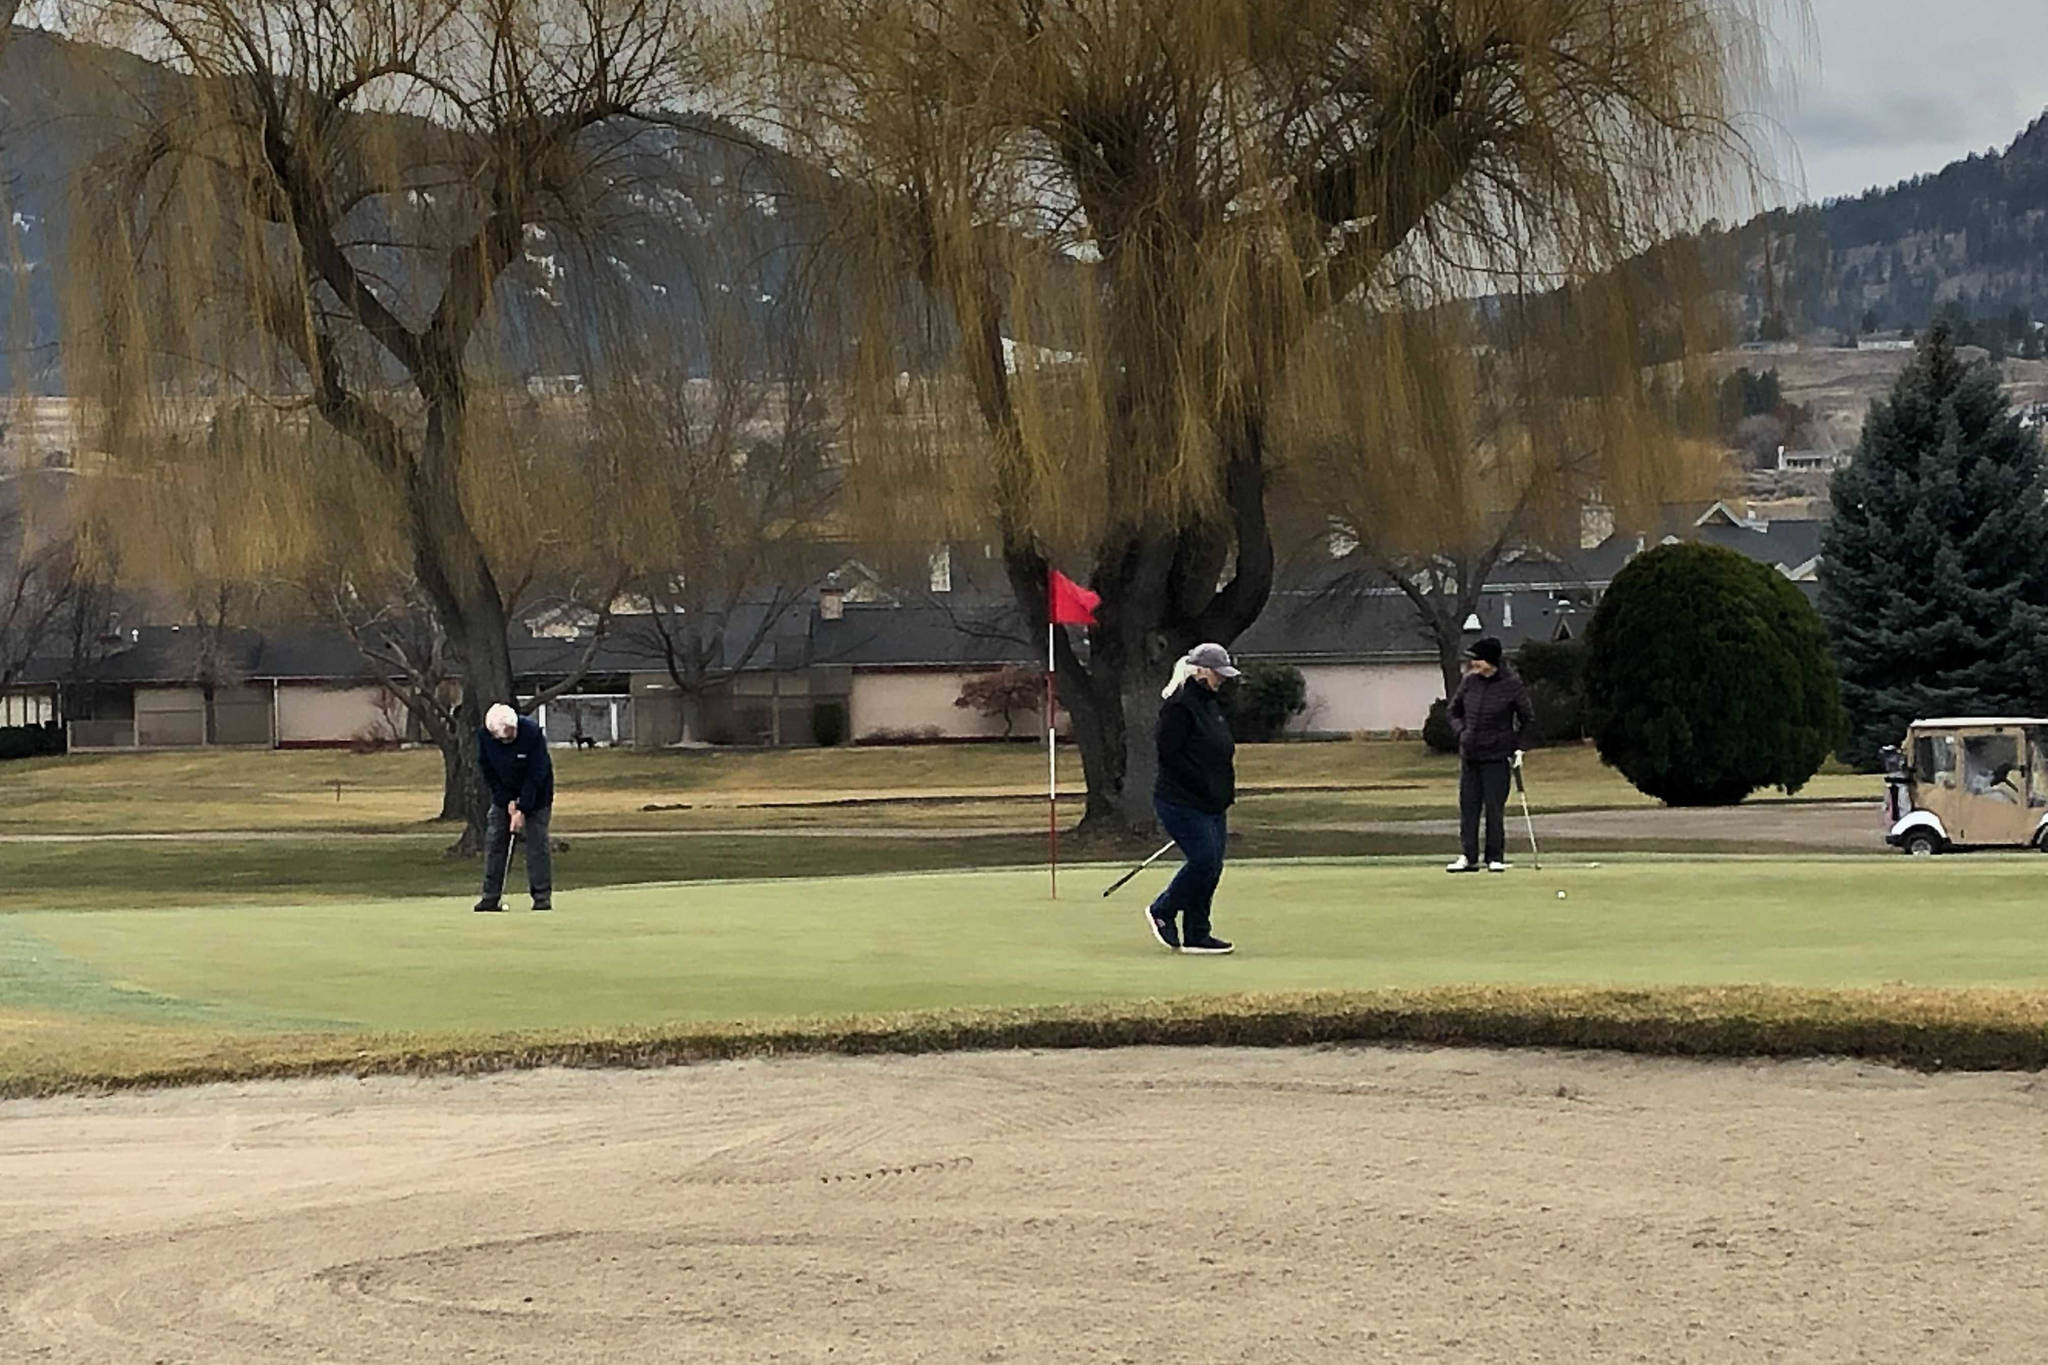 Penticton Golf and Country Club was in full swing on opening day on March 2. (Monique Tamminga Western News)